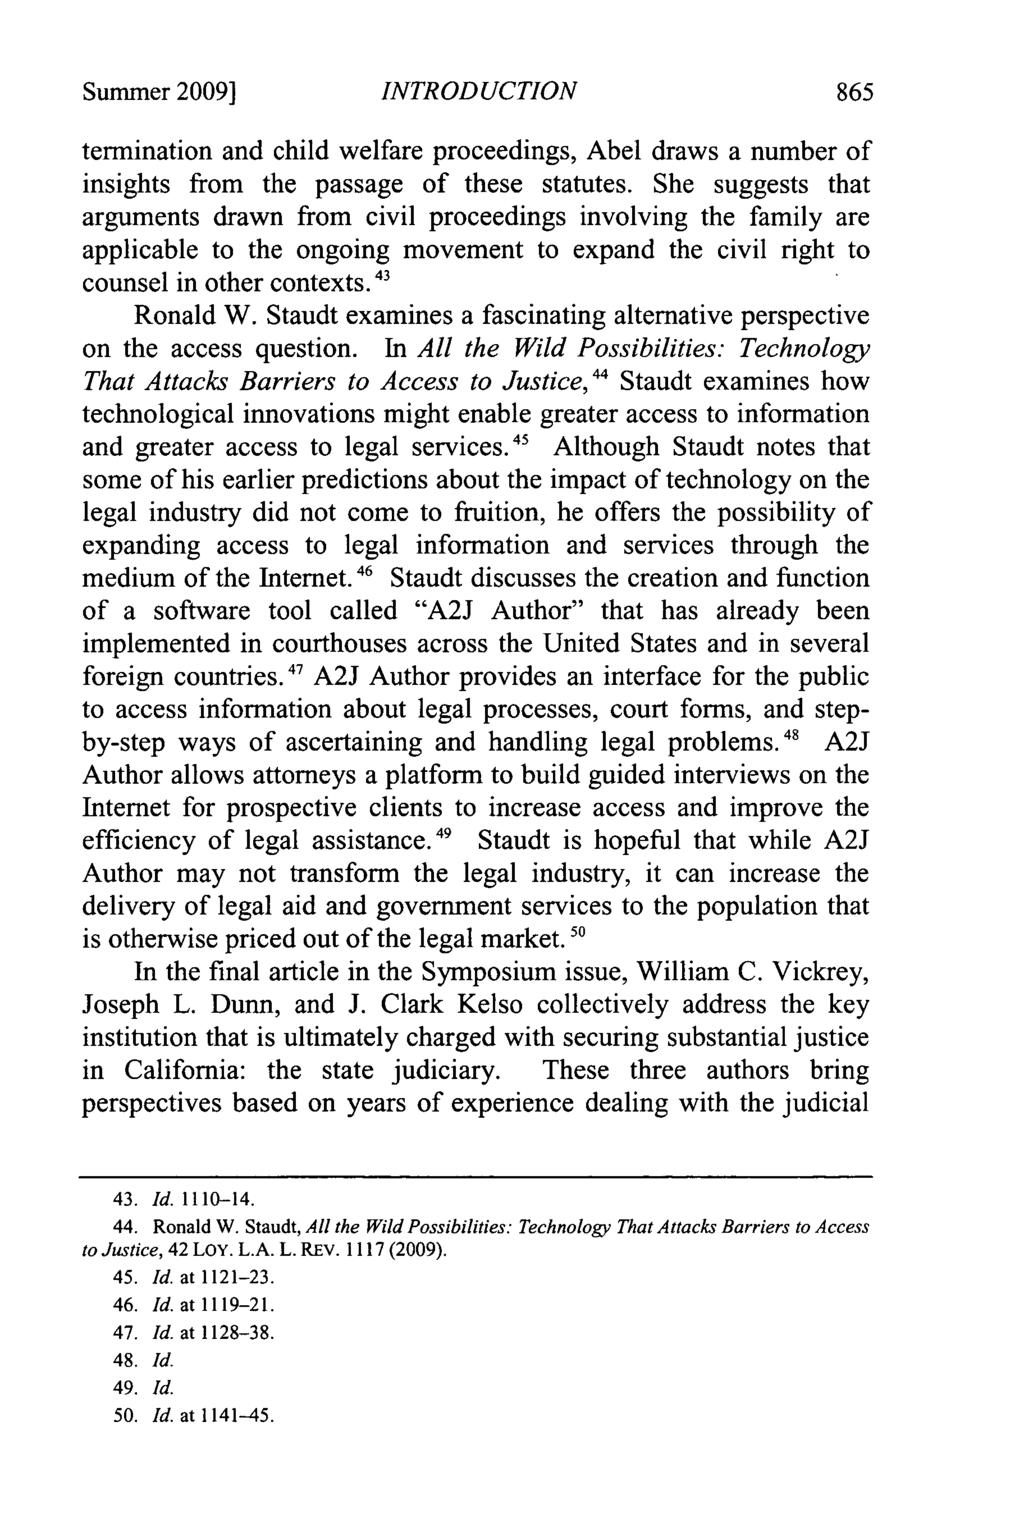 Summer 2009] INTRODUCTION termination and child welfare proceedings, Abel draws a number of insights from the passage of these statutes.